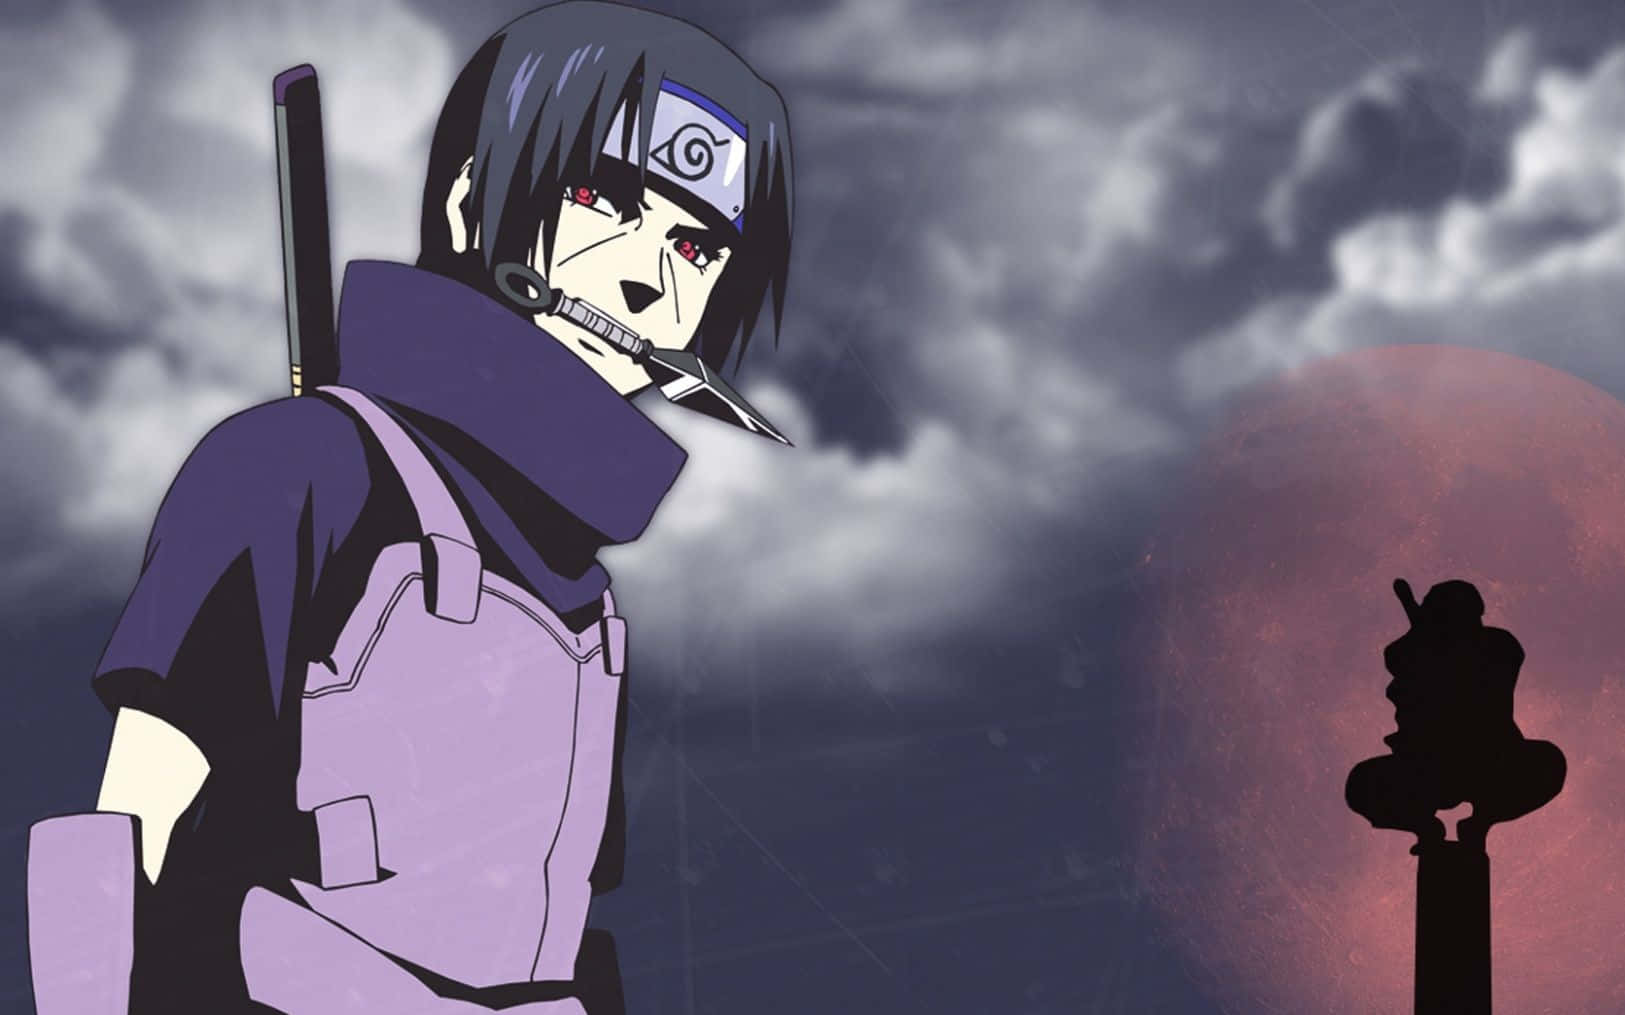 Cool Itachi - Going Beyond Limits Background